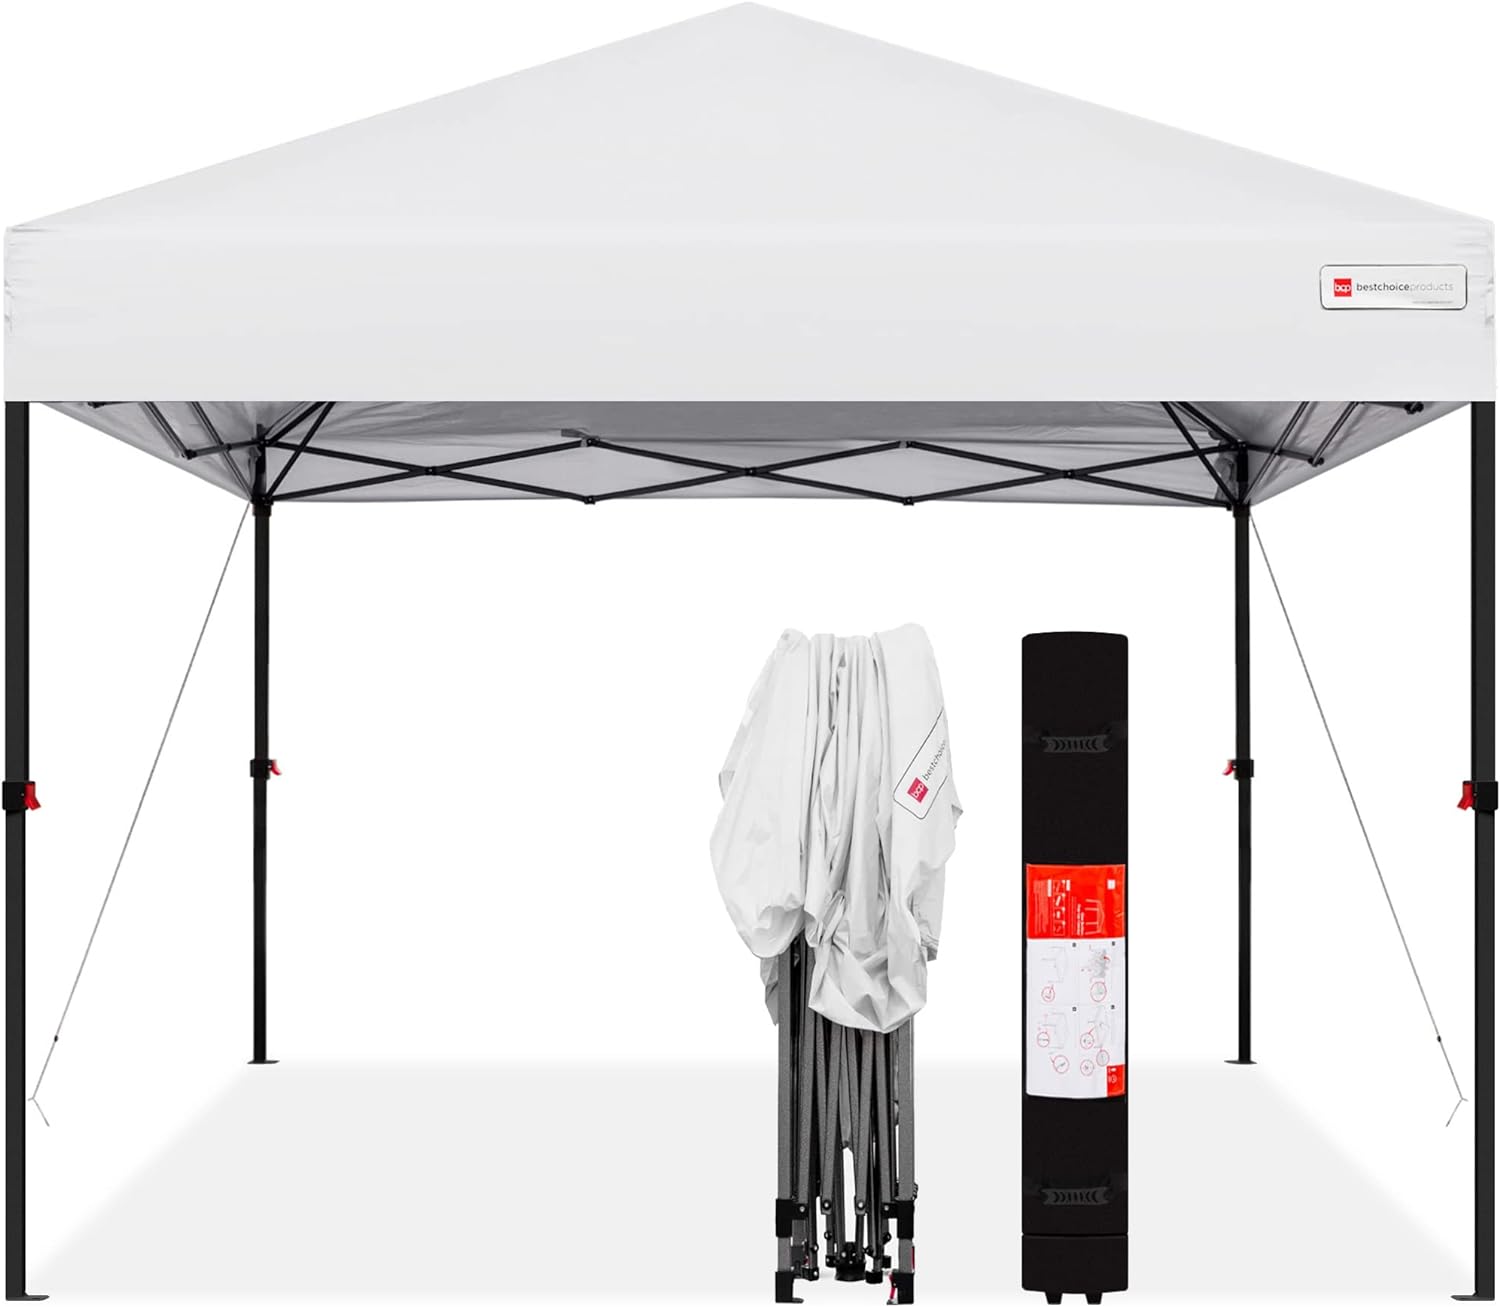 Best Choice Products 10x10ft 1-Person Setup Pop Up Canopy Tent Instant Portable Shelter w/ 1-Button Push, Straight Legs, Wheeled Carry Case, Stakes - White